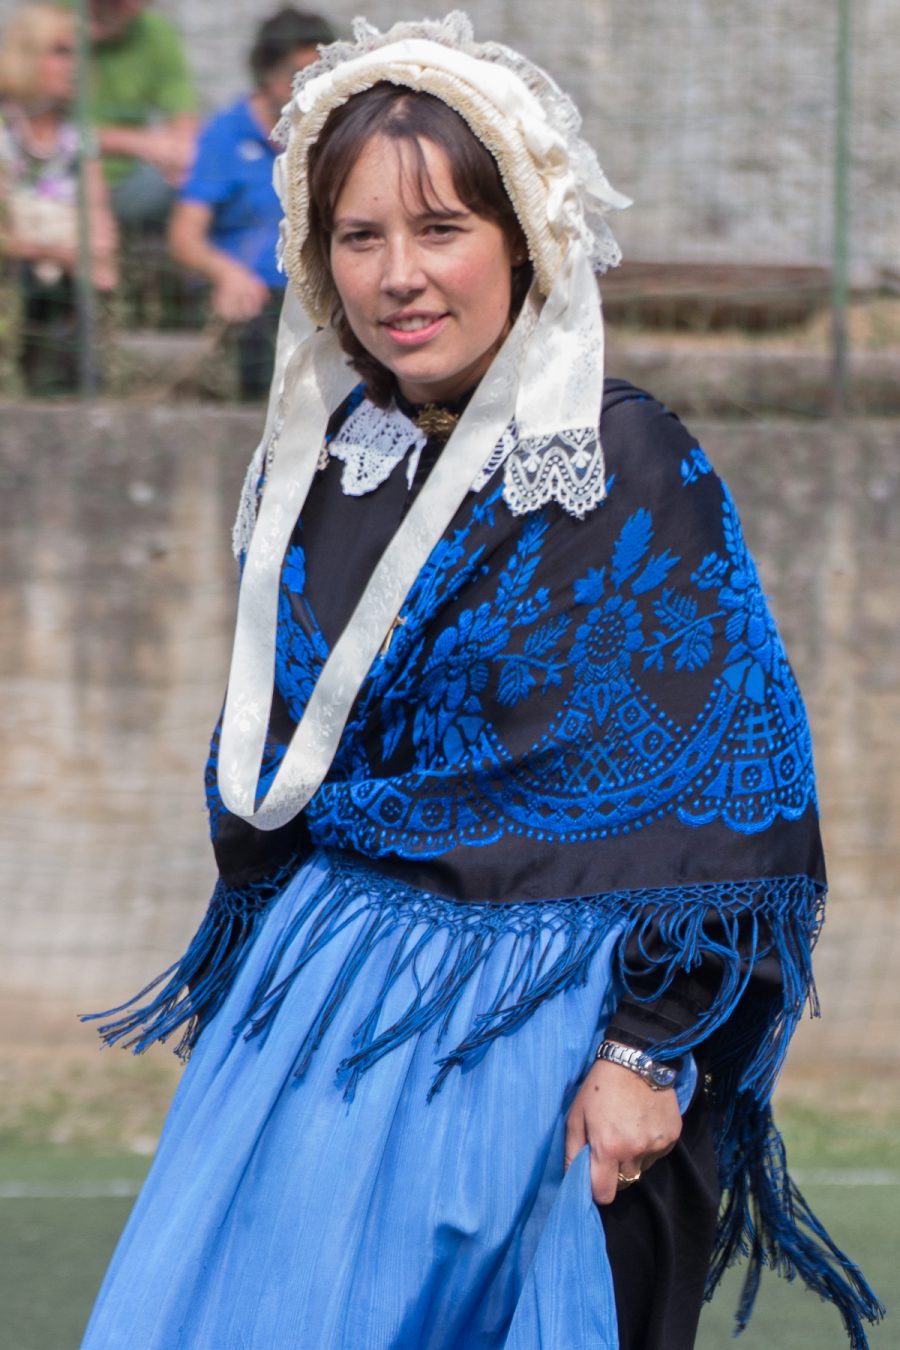 Woman at the Bal de Sabre, traditional summer festivity in Fenestrelle, 2017